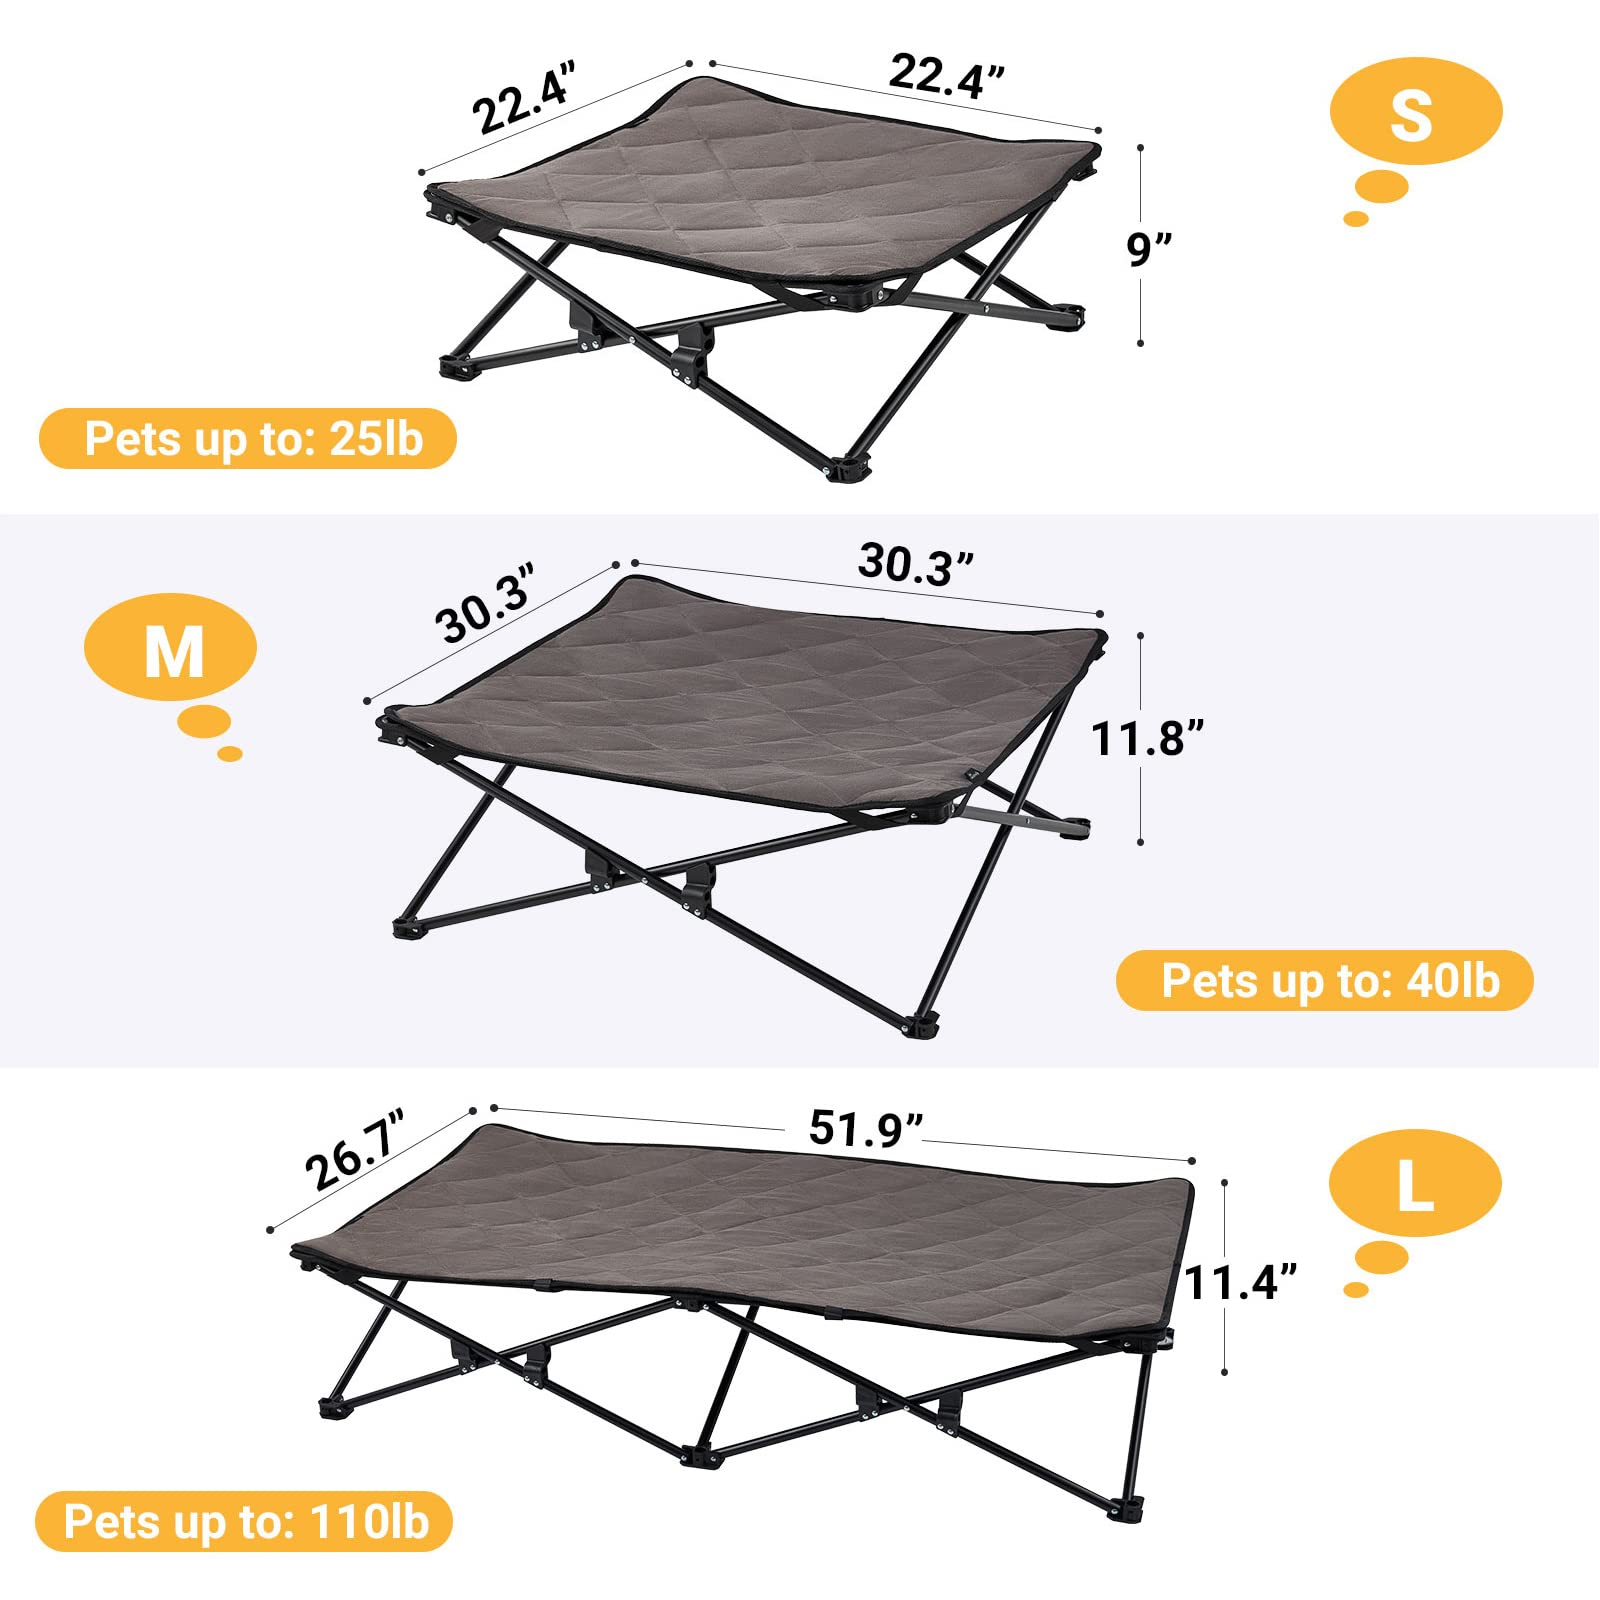 KingCamp Elevated Outdoor Raised Mat